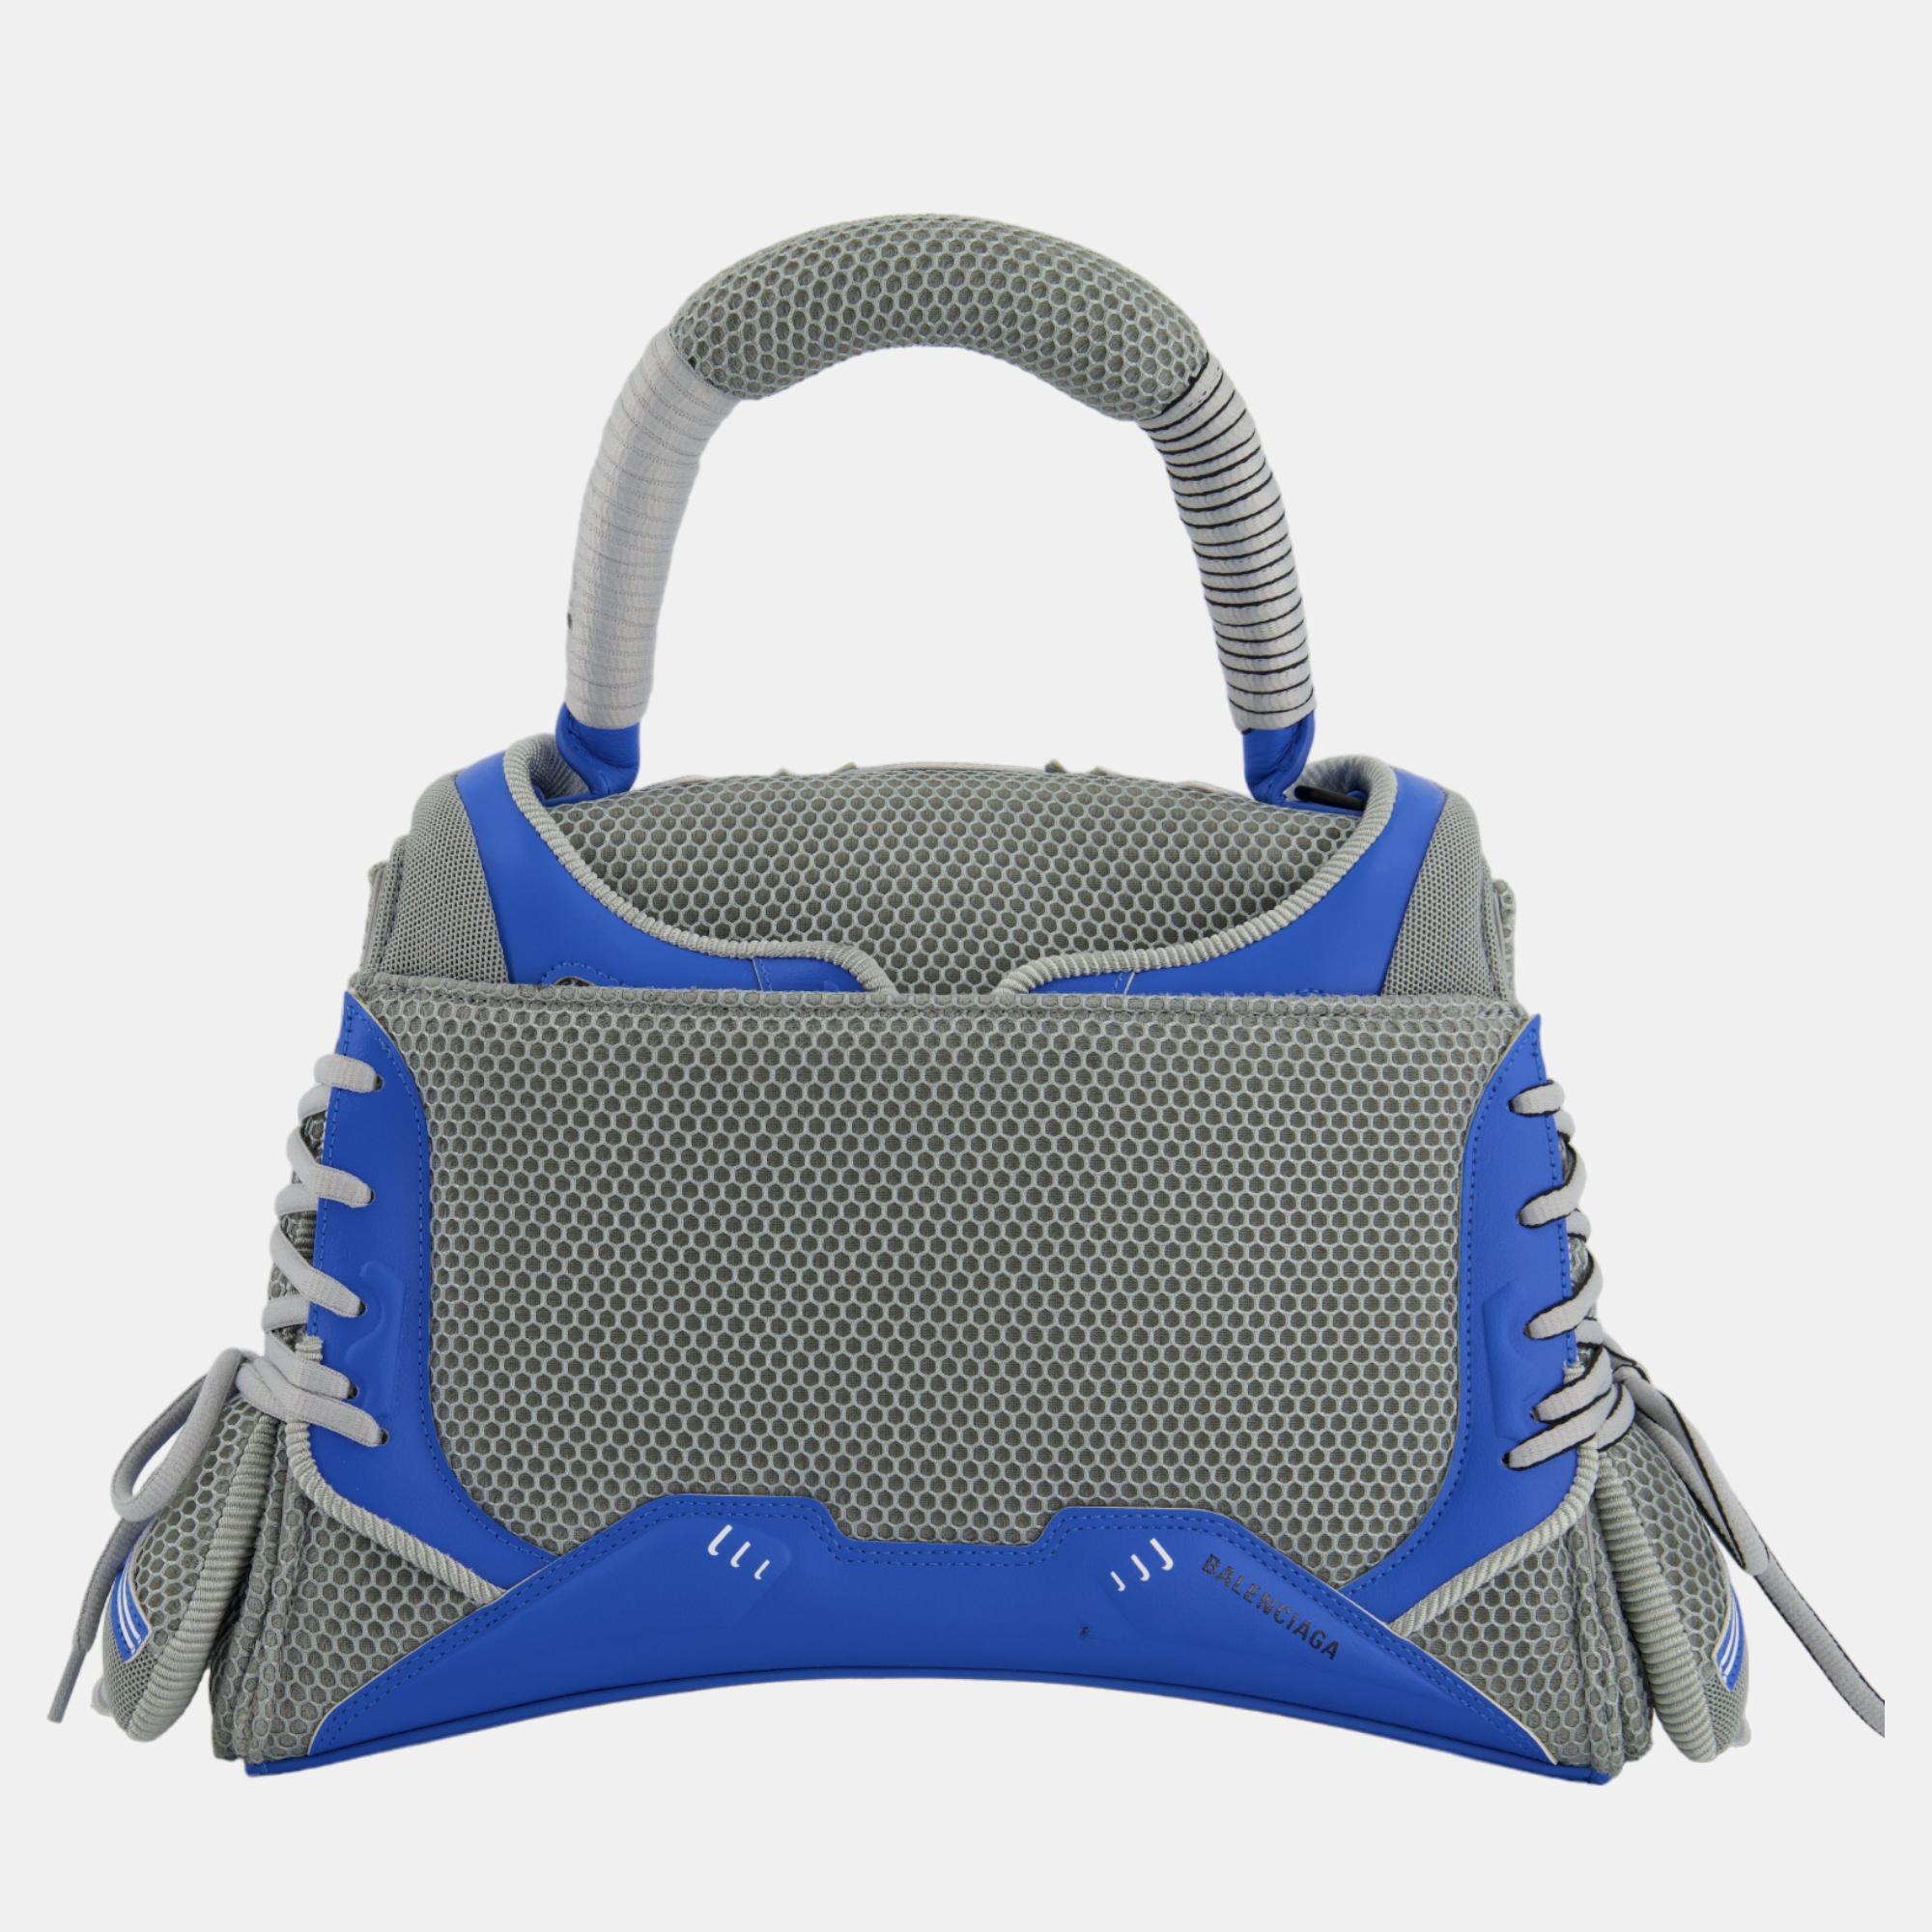 Balenciaga Blue And Grey Sneaker Head Hourglass Bag With Blue Hardware